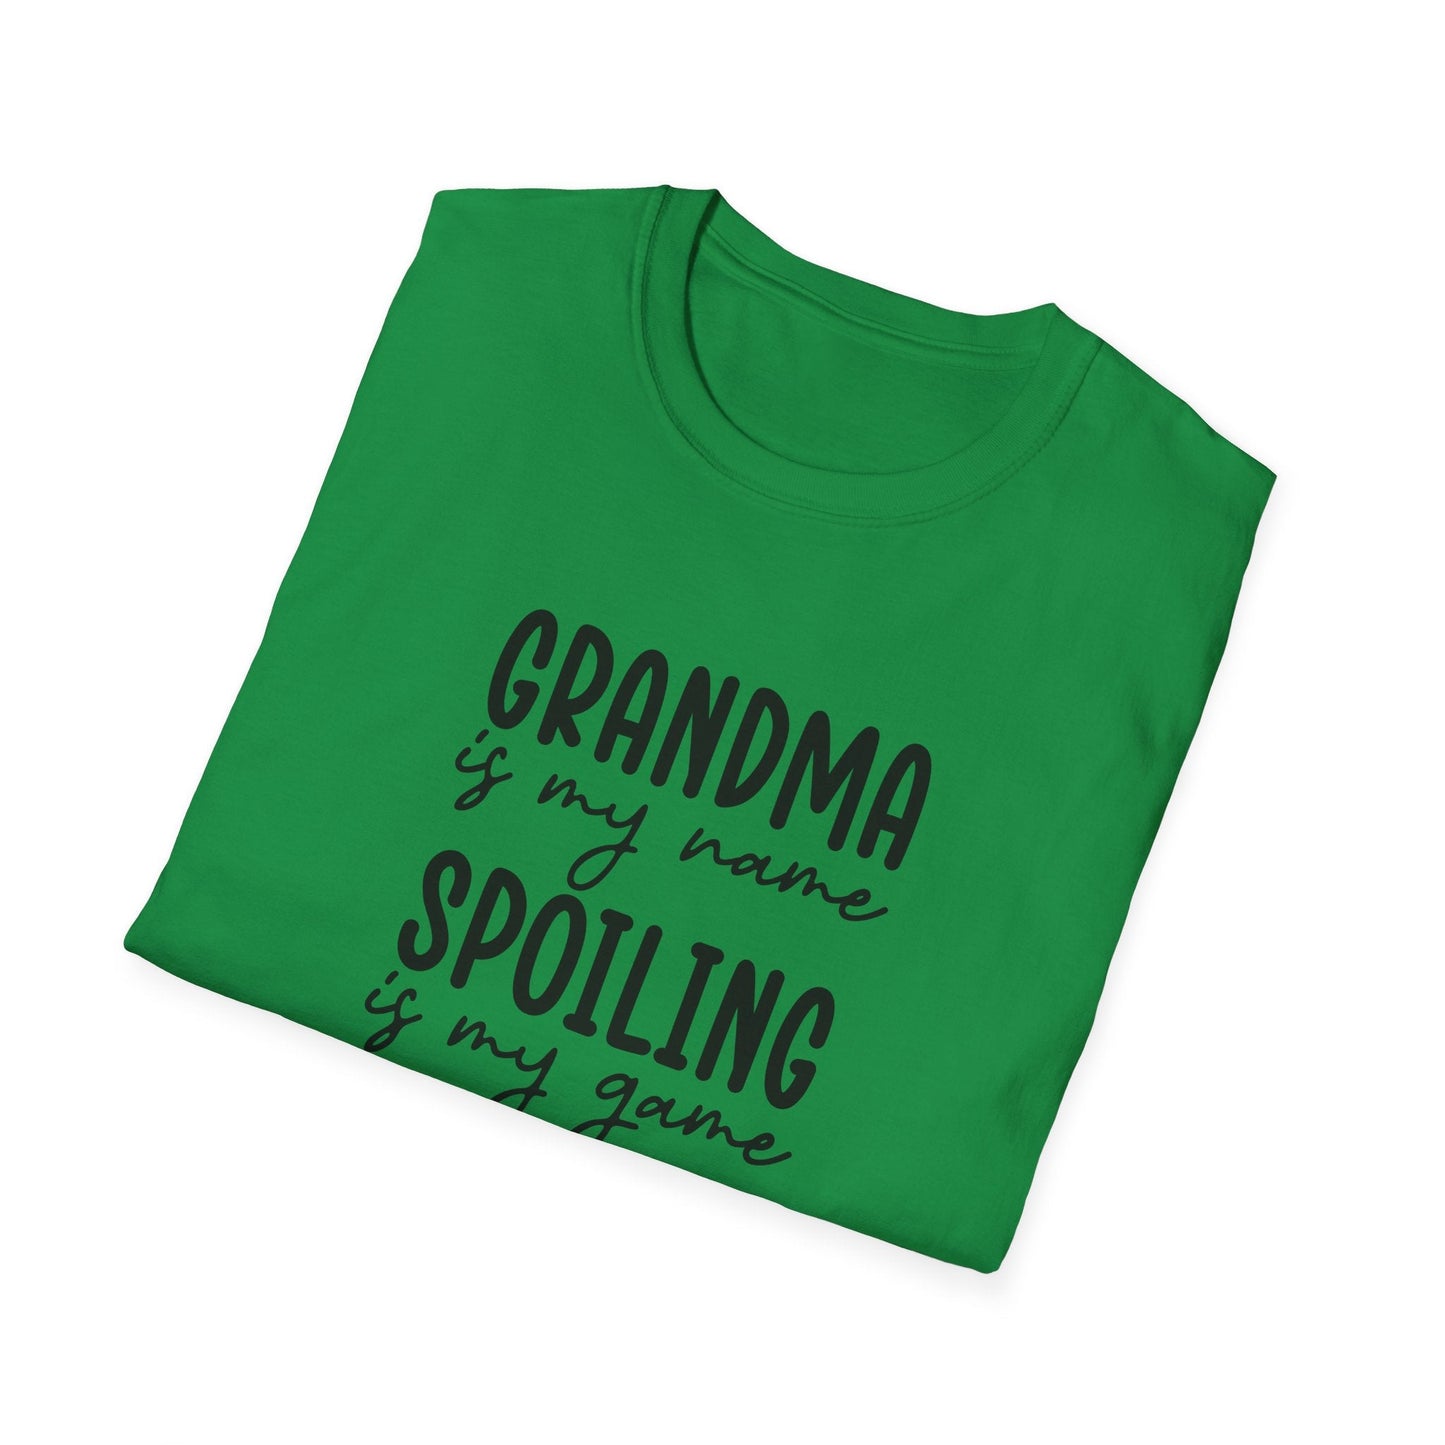 Grandma Is My Name Spoiling Is My Game Unisex Softstyle T-Shirt